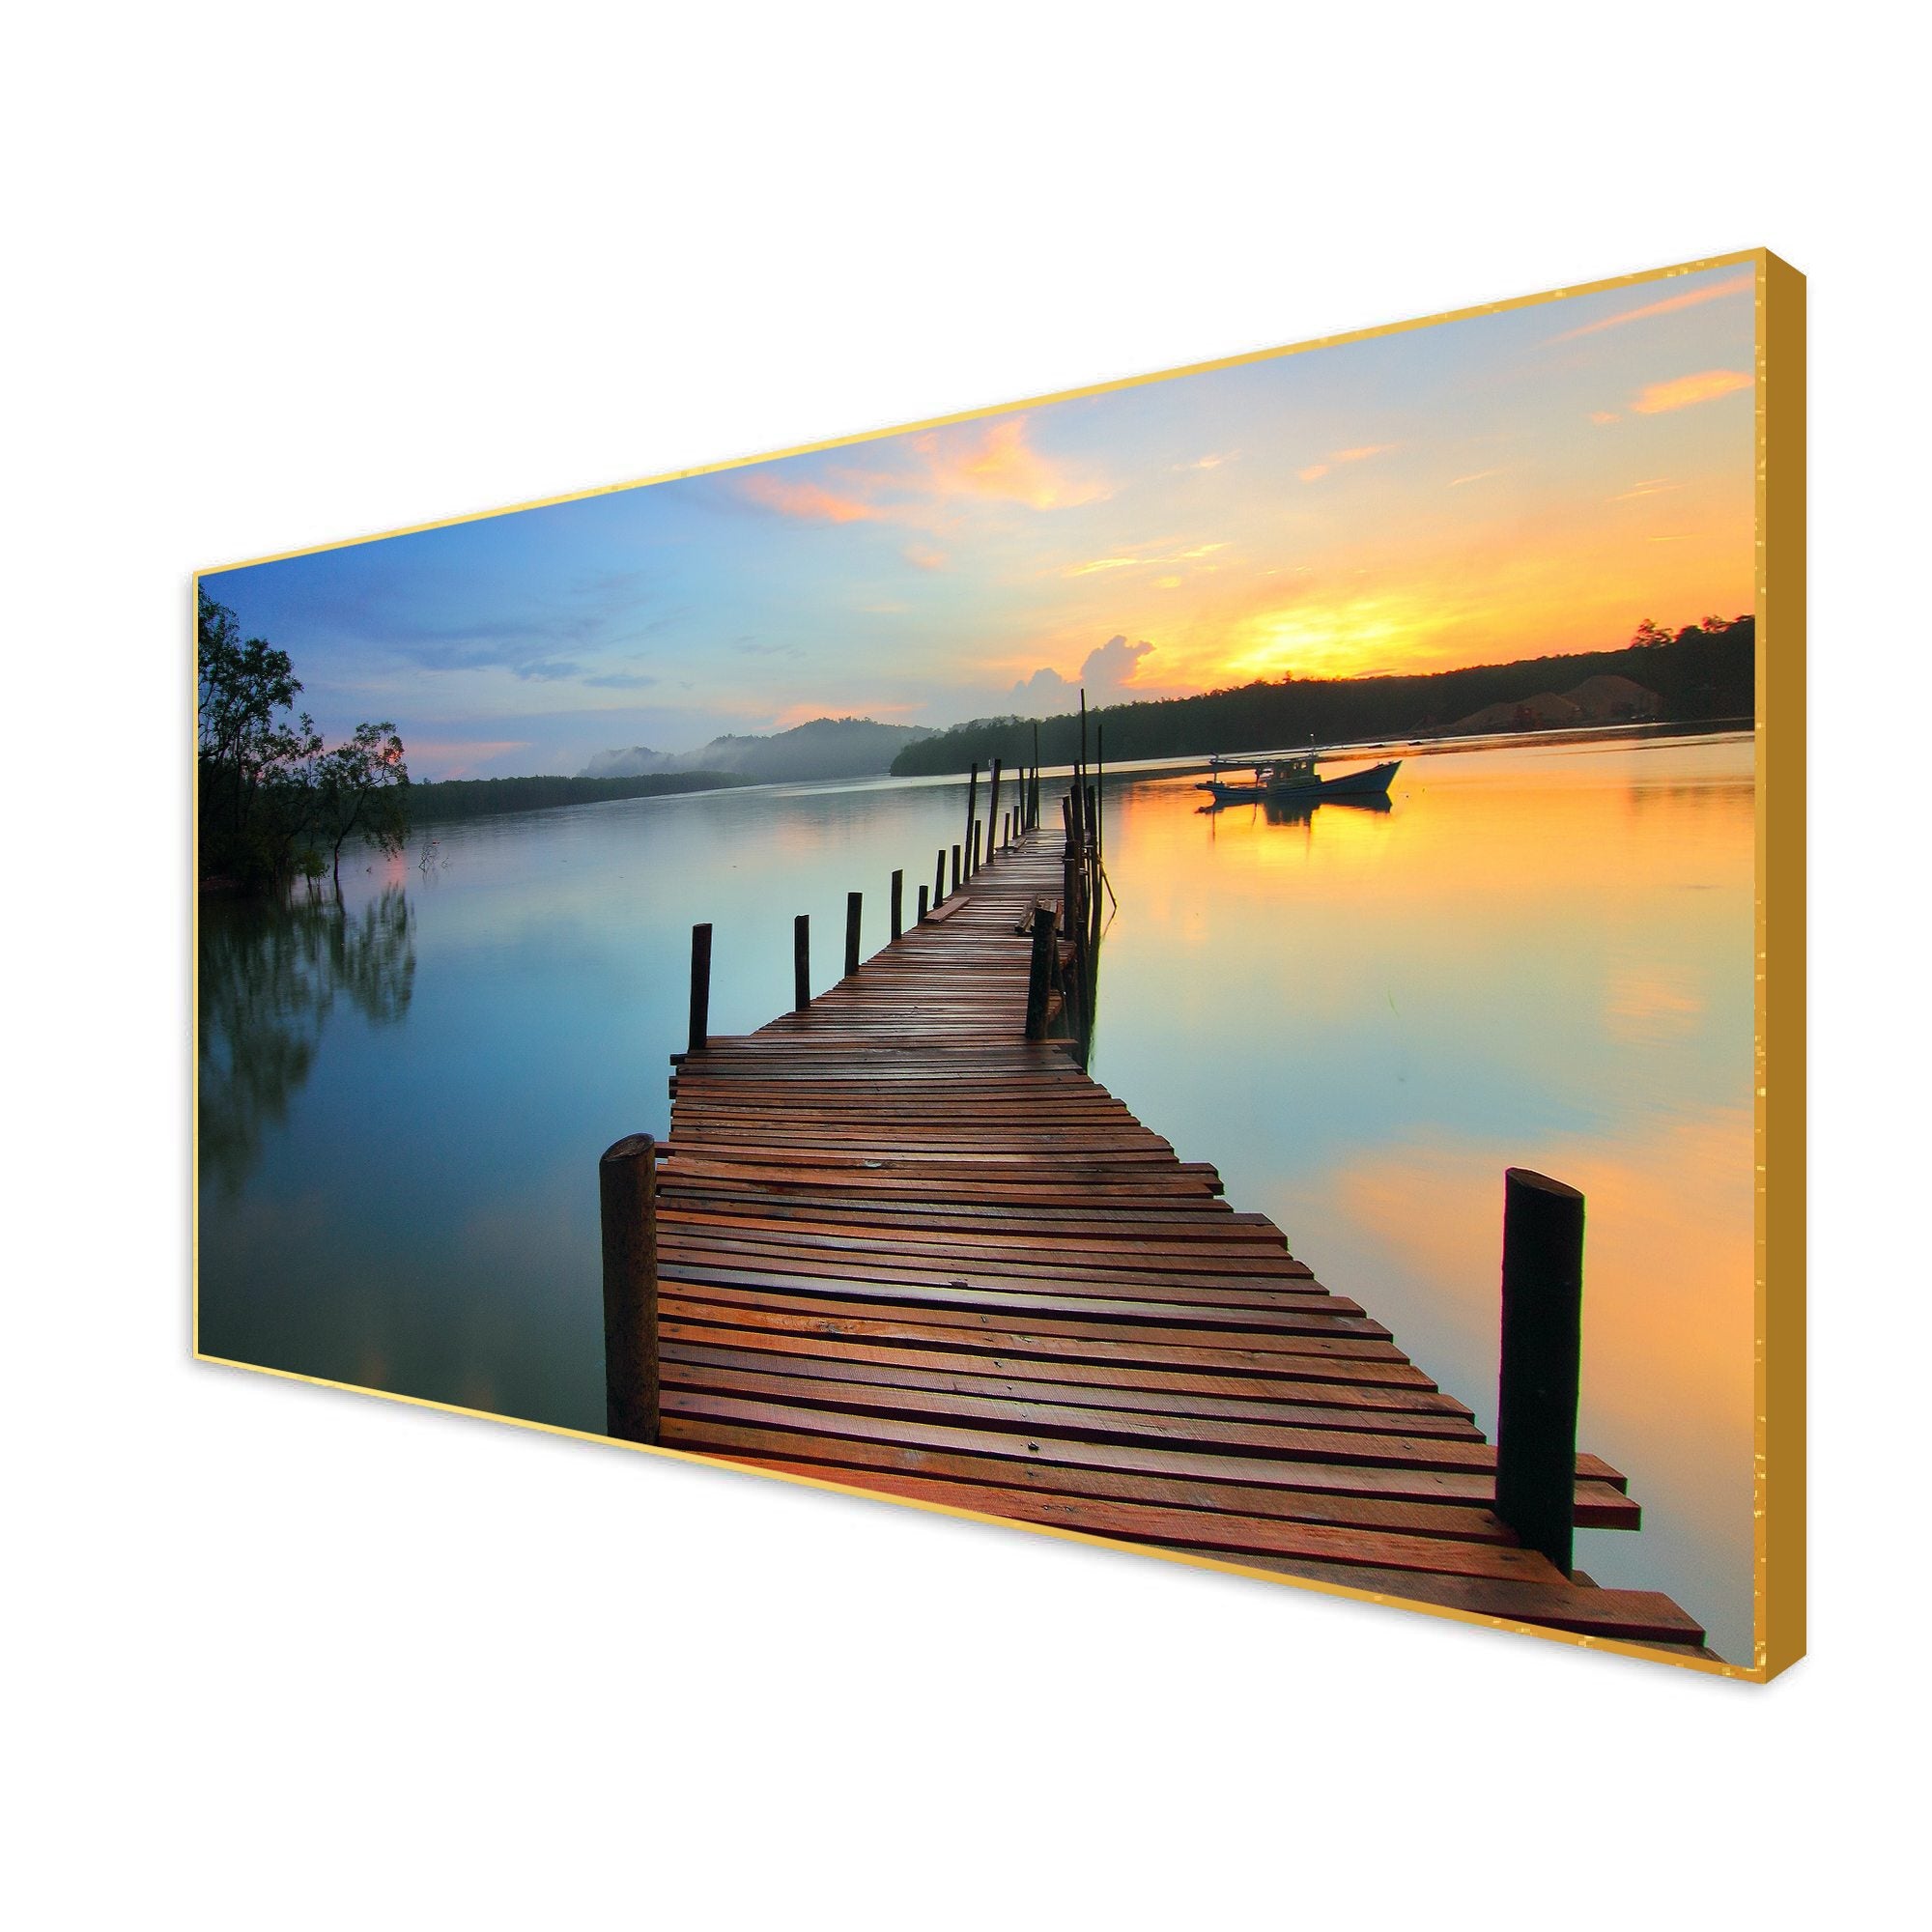 Wooden Jetty Lake in Sunset Floating Wall Painting